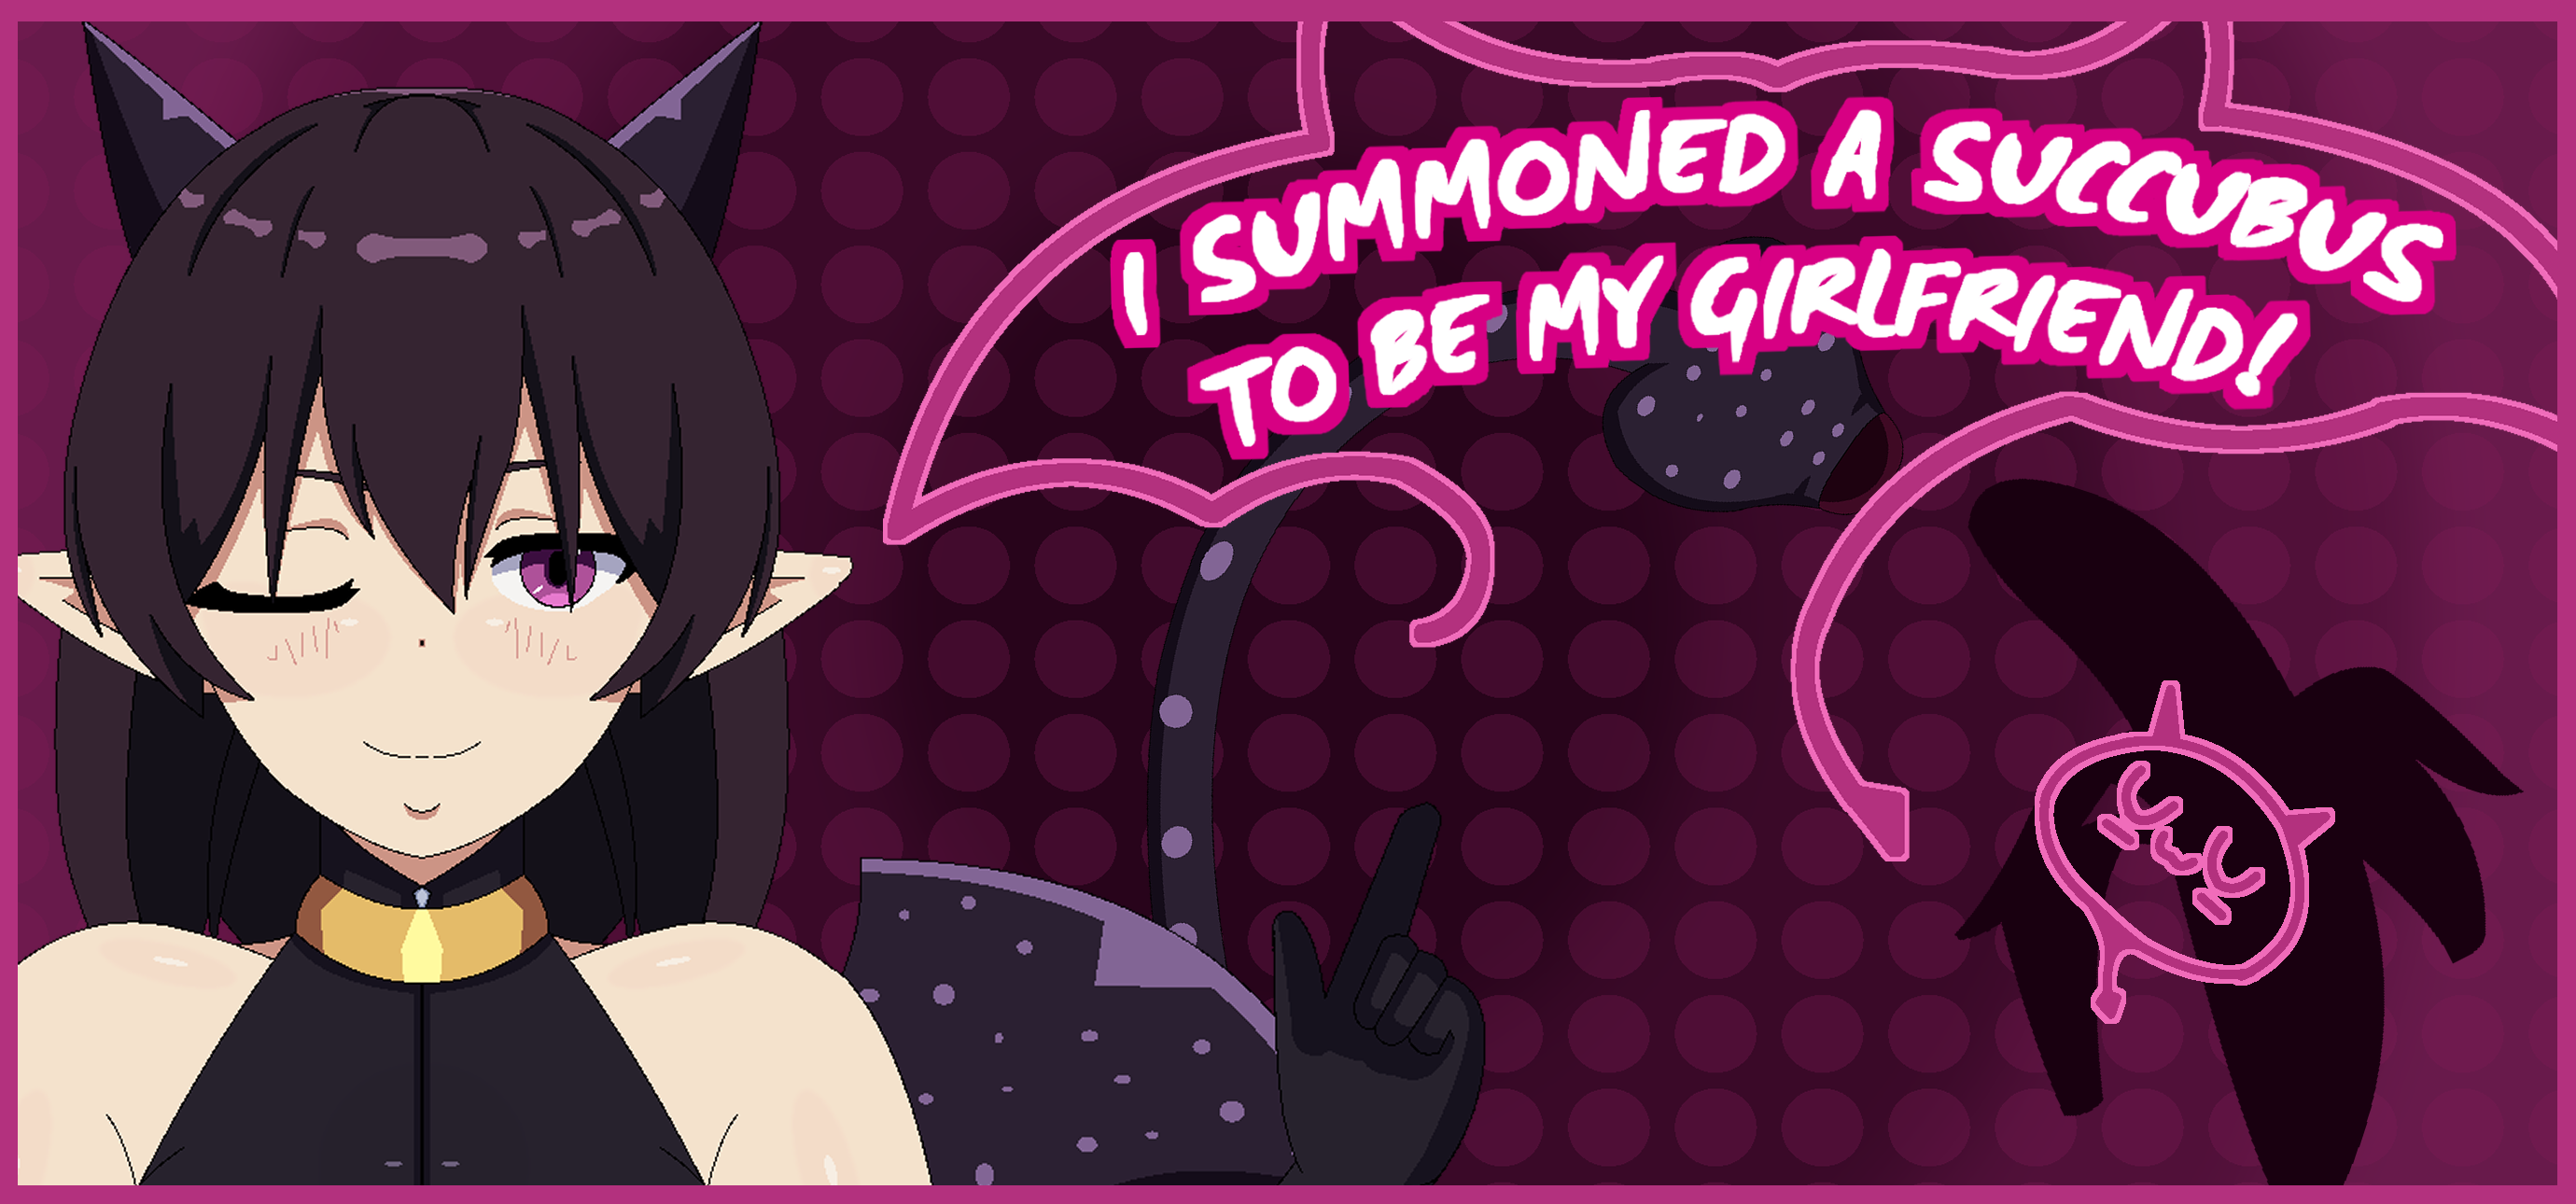 I Summoned A Succubus To Be My Girlfriend!